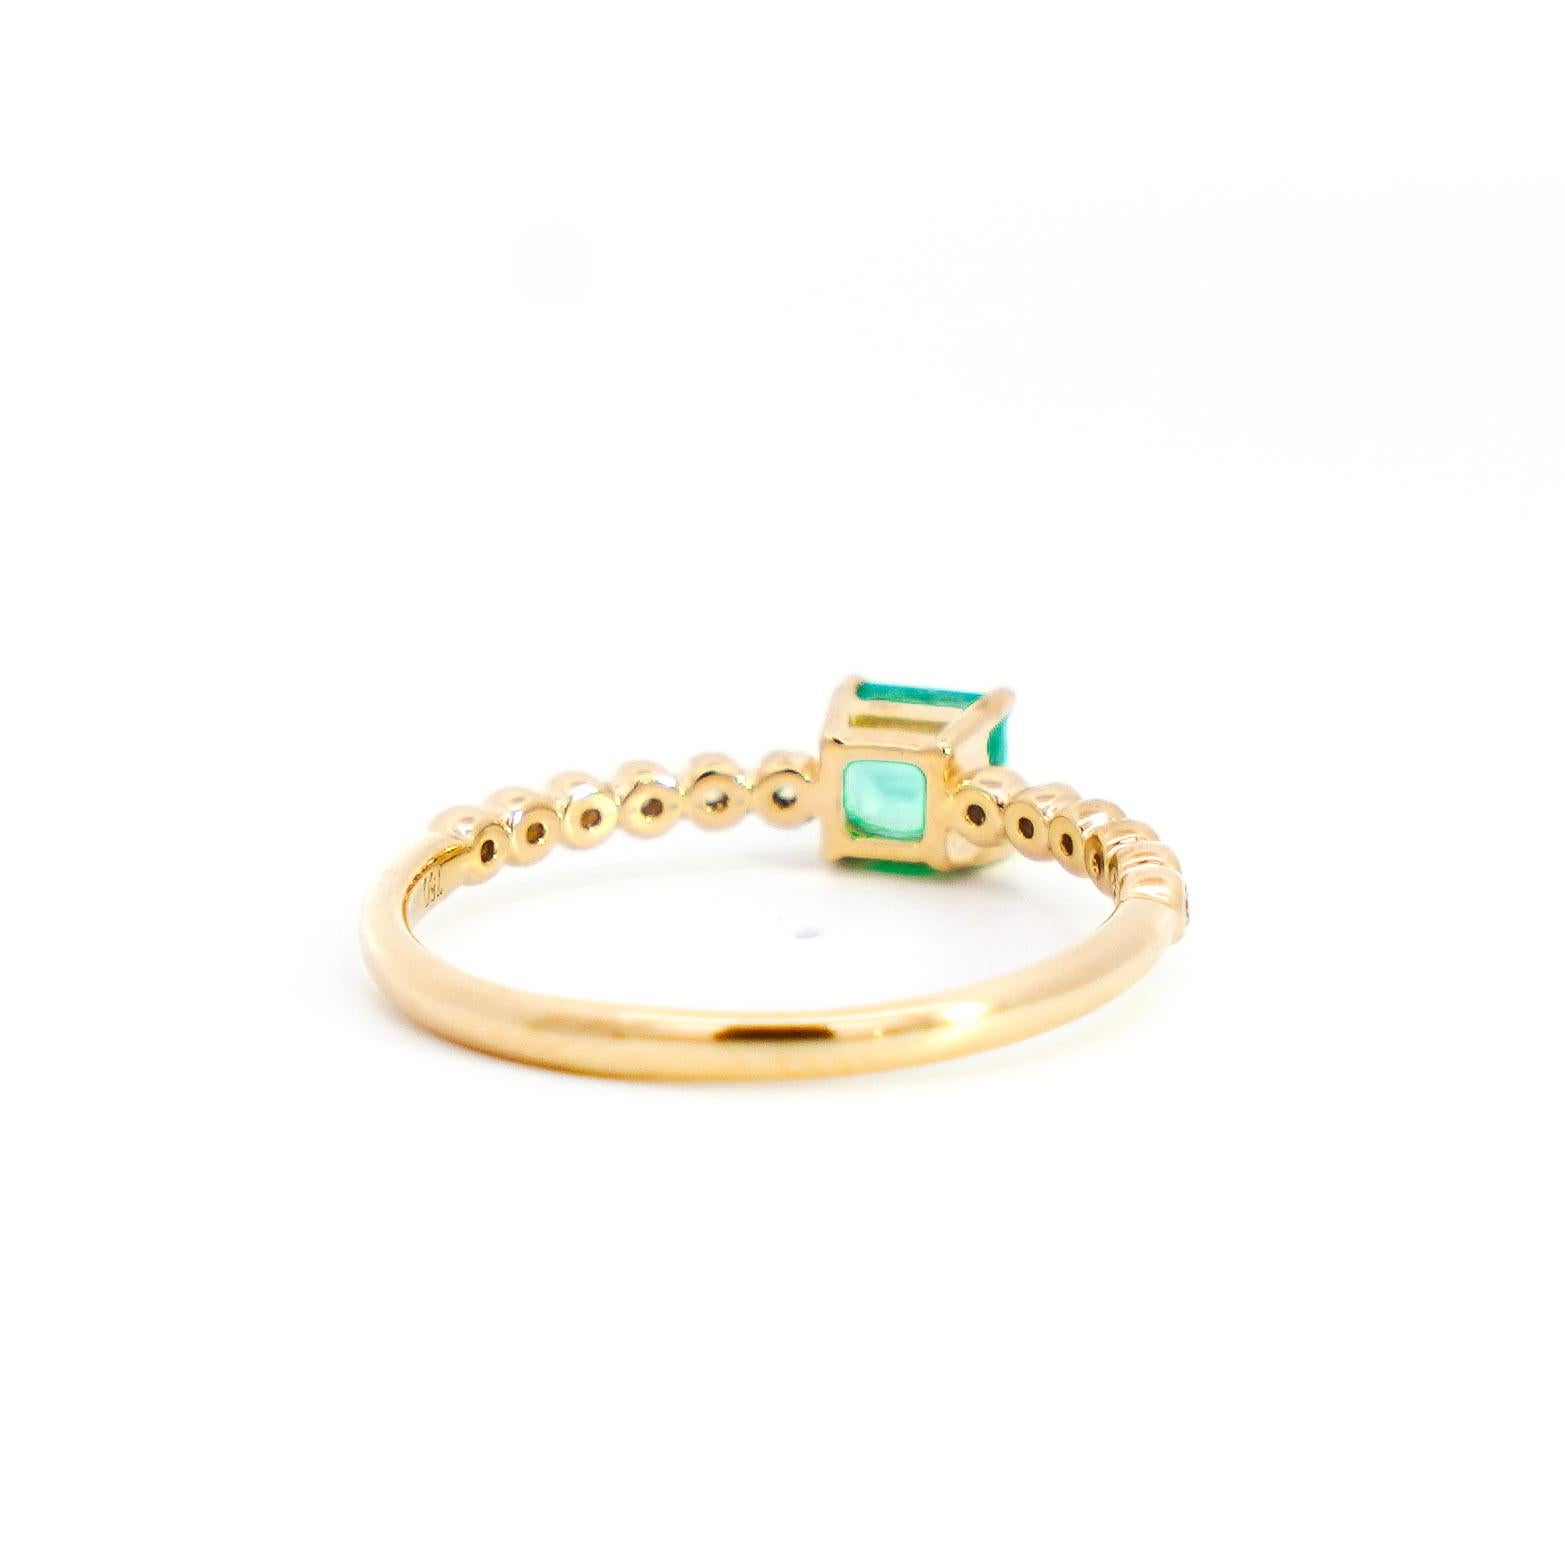 Natural Green Emerald and Natural Diamond Stacking Ring, Set in 18K Yellow Gold. Set with eye-clean white diamonds and a vivid green emerald of Colombian origin. Fixed with a 4-prong and bezel setting that features a stunning ribbed band. Ideal for